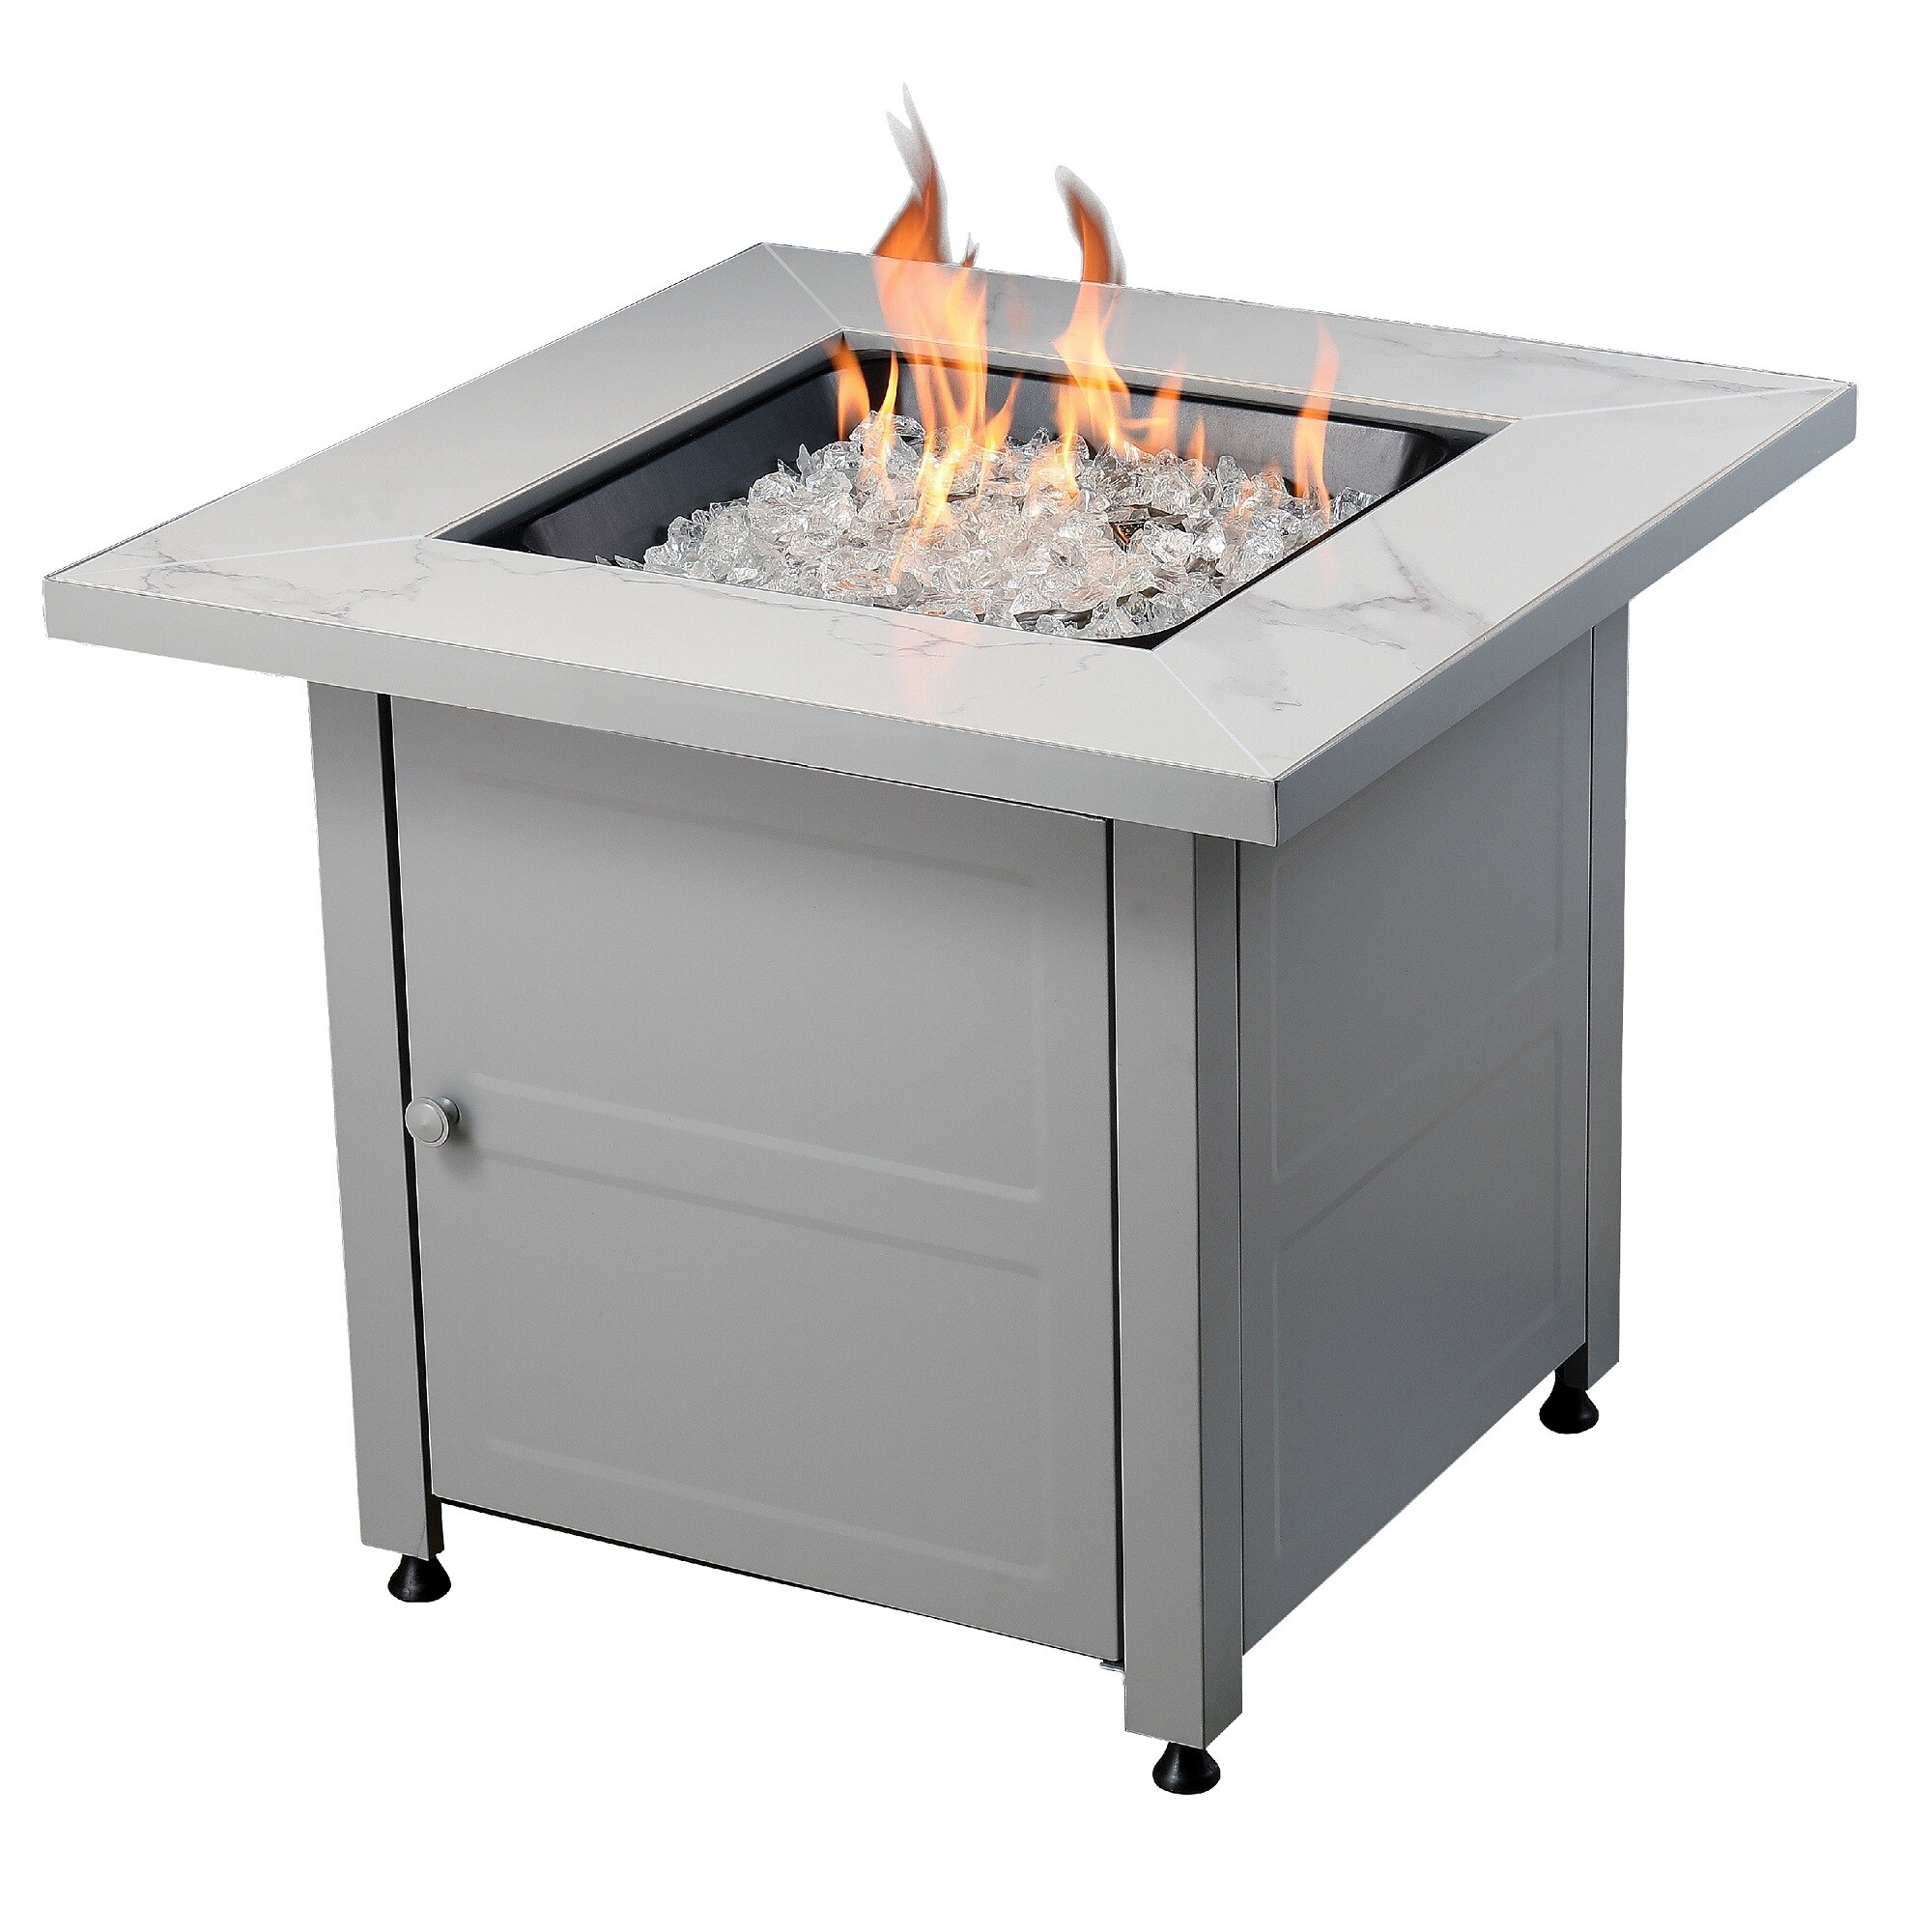 Propane Gas Fire Pit Table, Hayneedle Propane Fire Pit